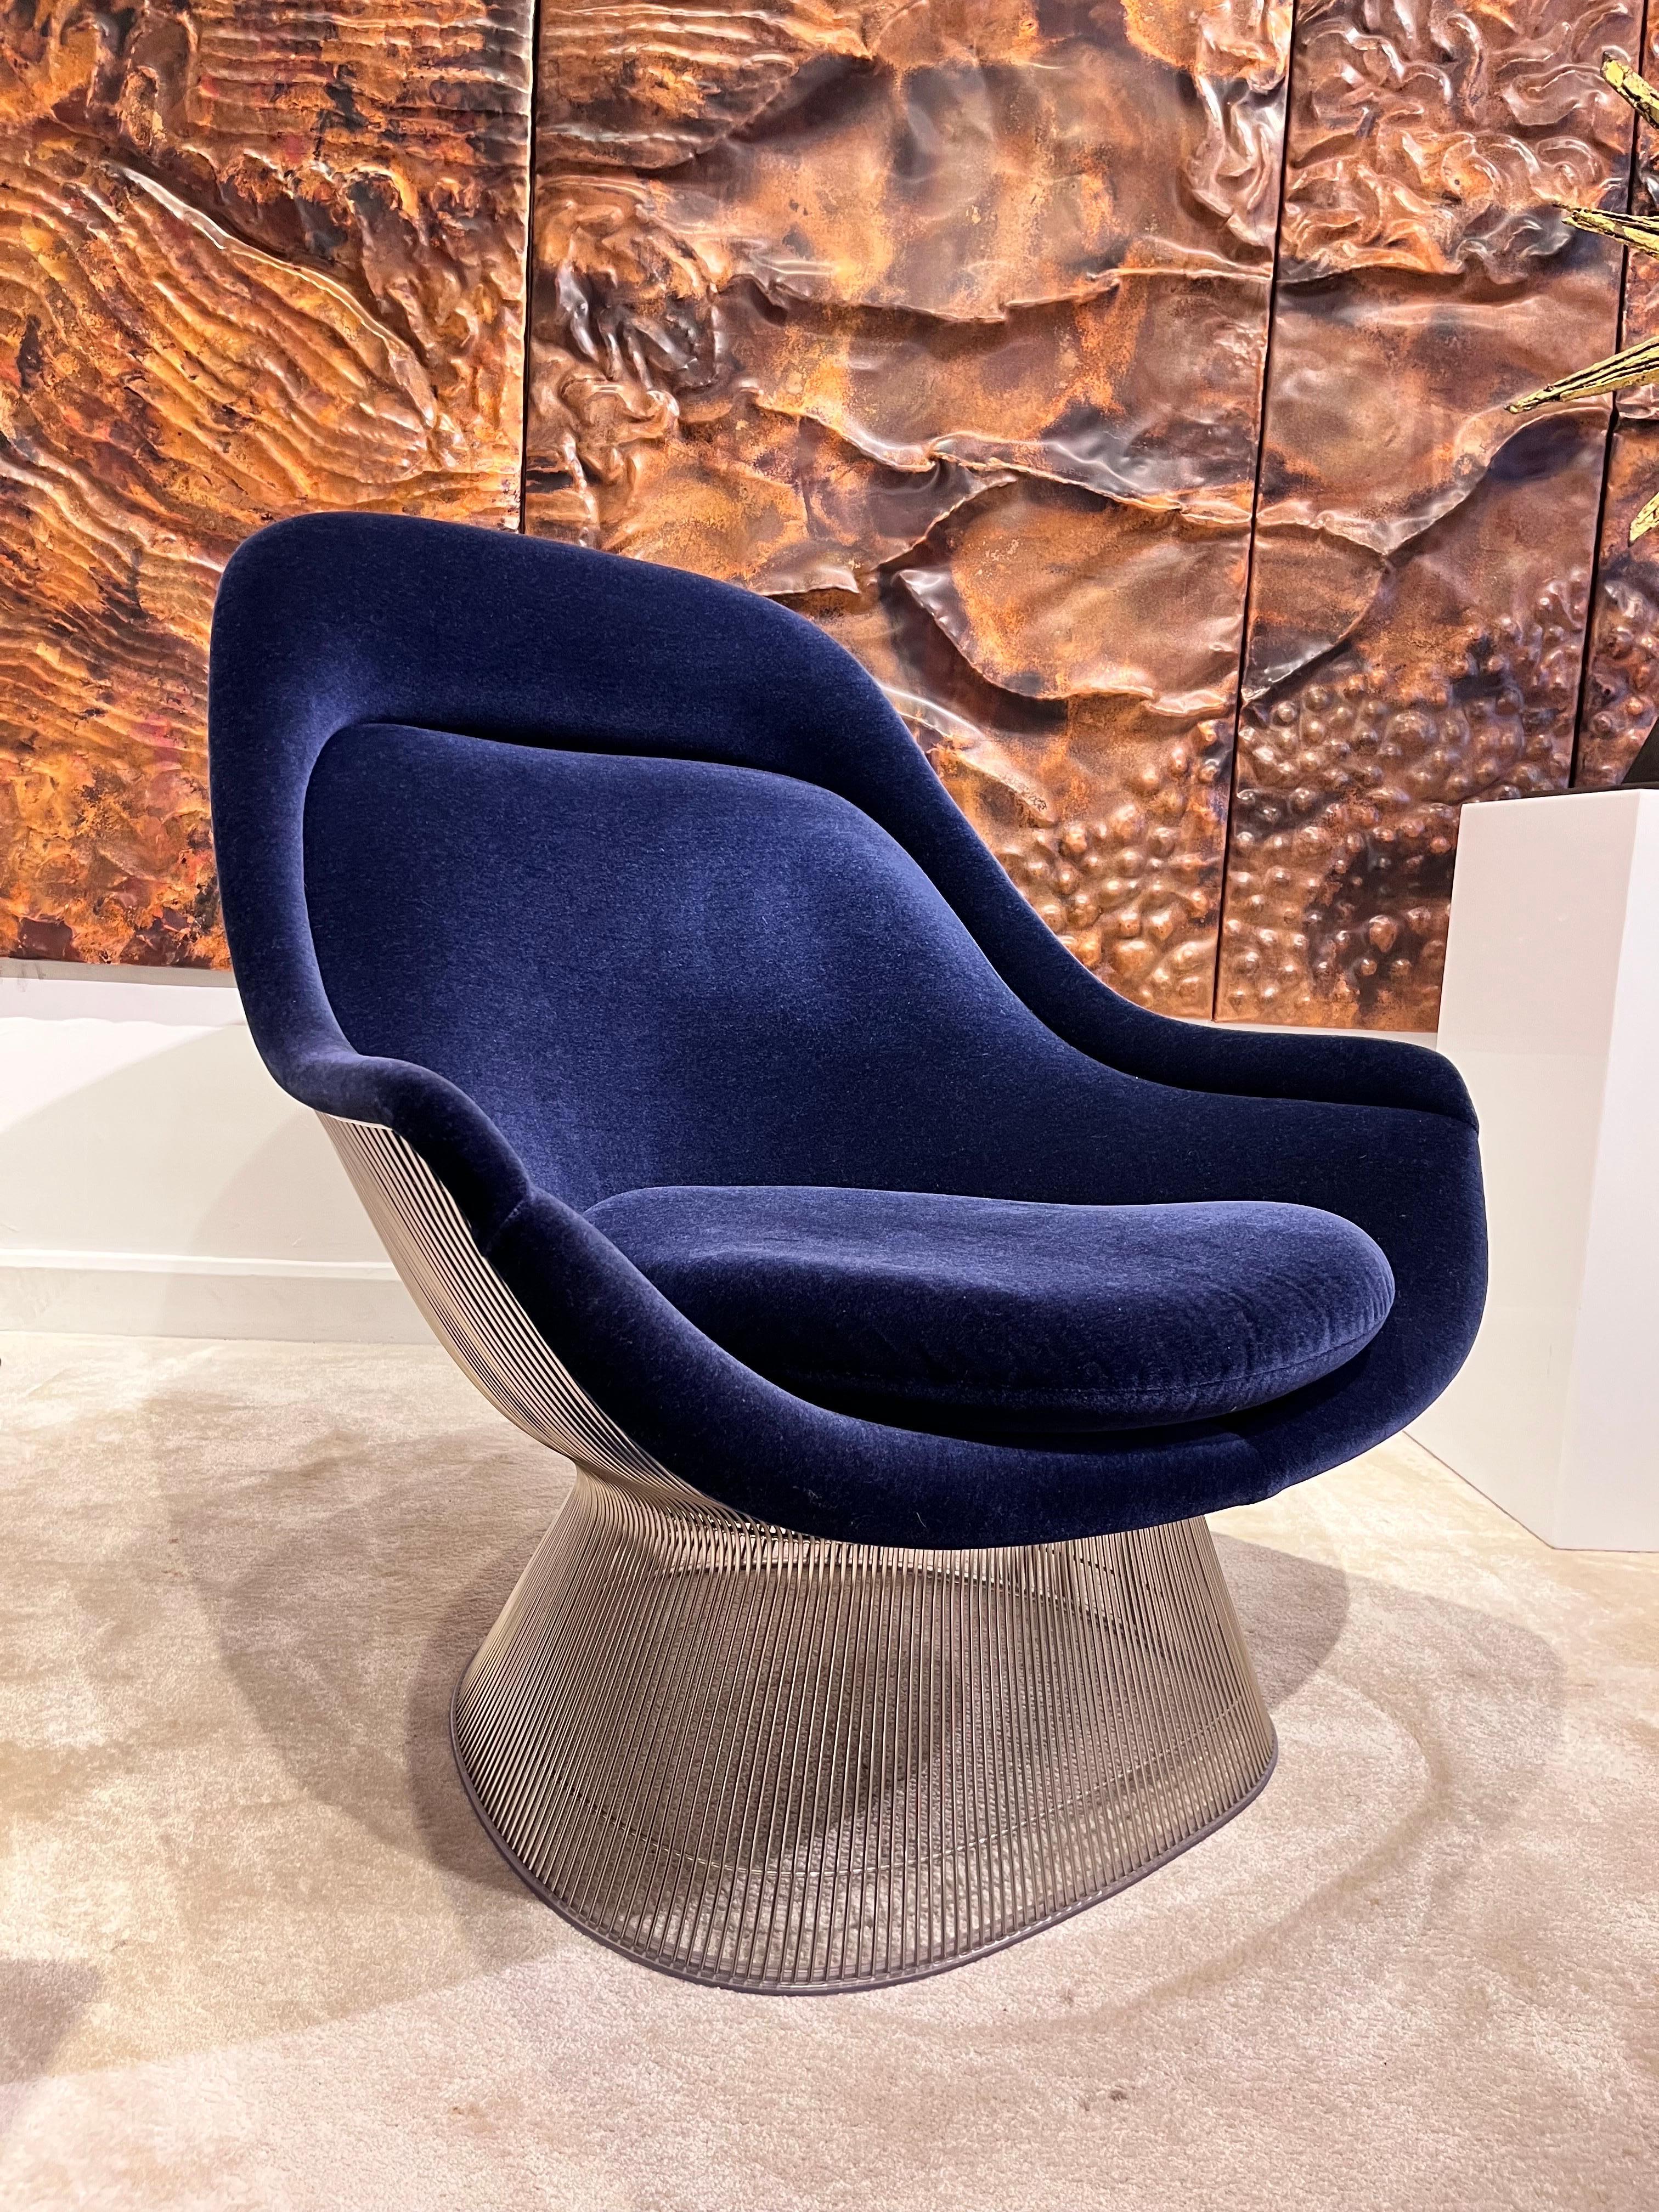 Pair of Warren Platner Easy Chairs for Knoll
Blue velvet fabric
Model 1705
USA Circa 1966

Dimensions:
Height: 99 cm (38.98 in)
Width: 101 cm (39.77 in)
Depth: 95 cm (37.41 in)
Seat Height: 45 cm (17.72 in)